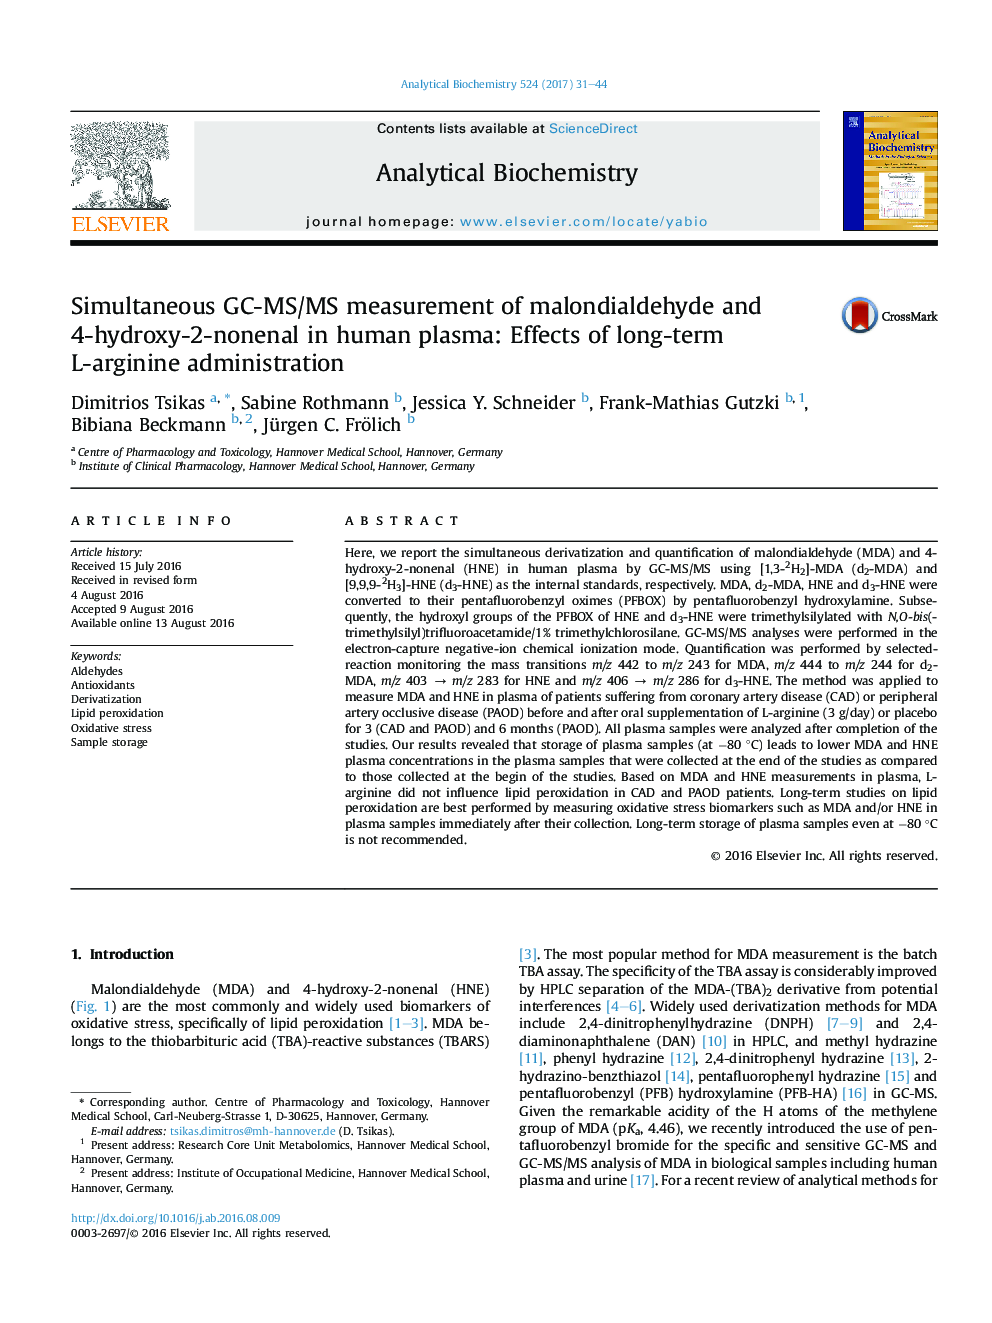 Simultaneous GC-MS/MS measurement of malondialdehyde and 4-hydroxy-2-nonenal in human plasma: Effects of long-term L-arginine administration